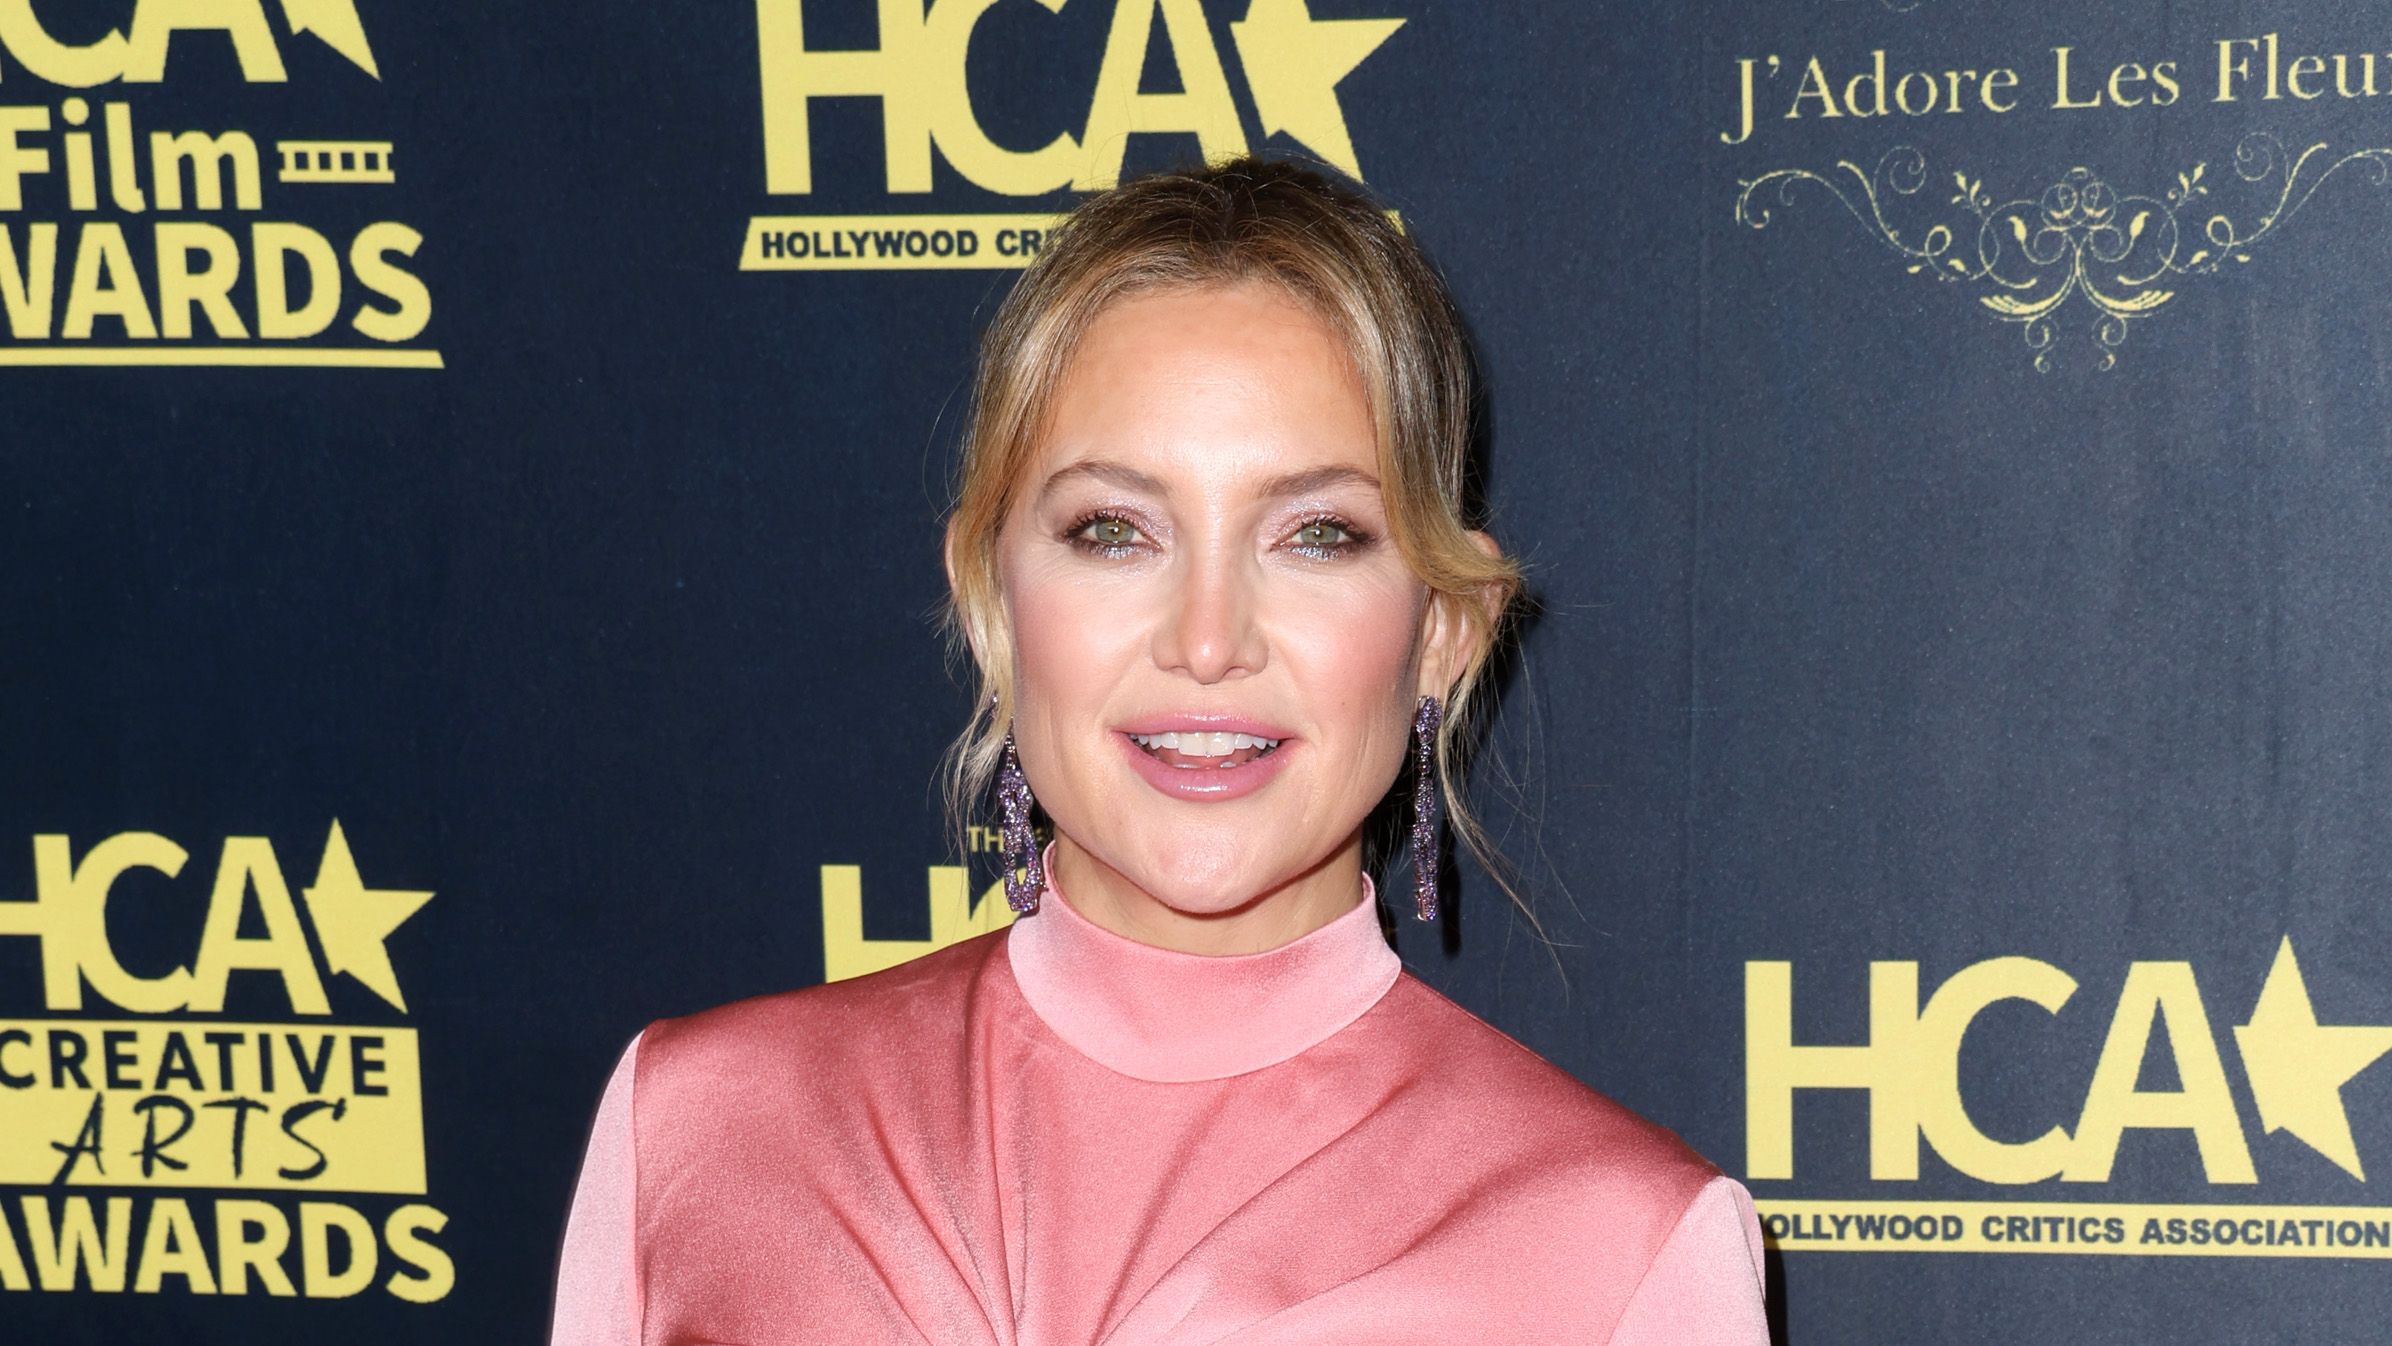 Kate Hudson's abs are so toned in bandeau bra & oversized blazer